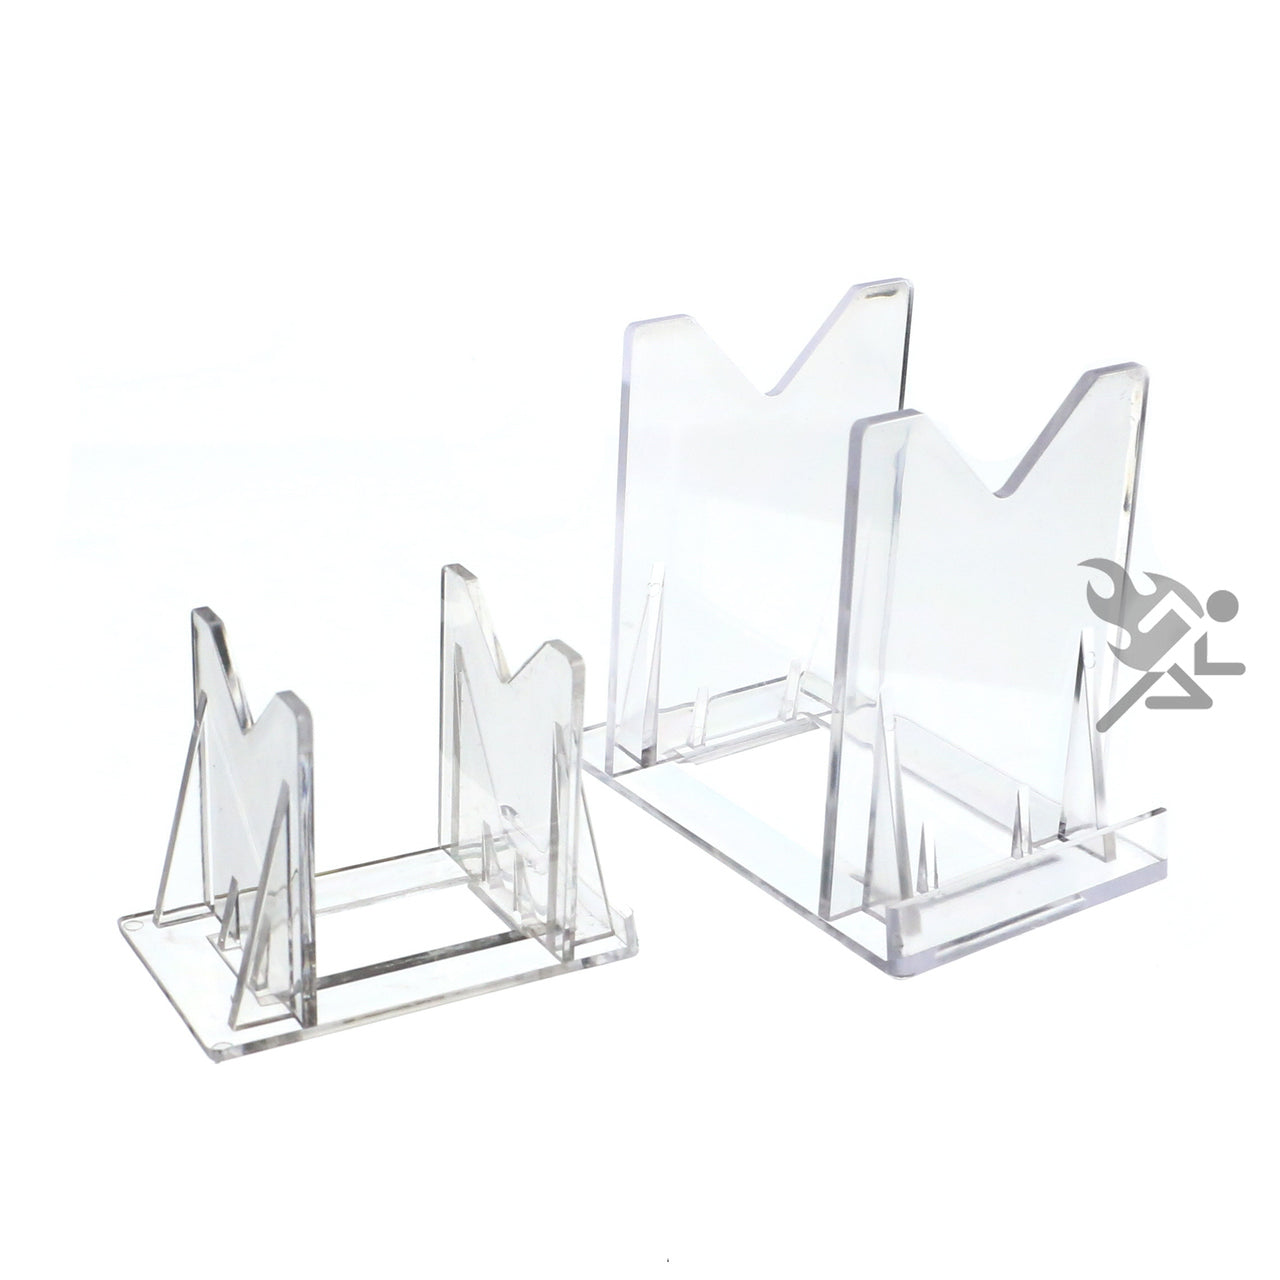 OnFireGuy 25pcs Fishing Lure Display Stands | Clear Acrylic Fishing Lure Easels | Accessories for Fishing & Decoration | 3-Piece Display Stand